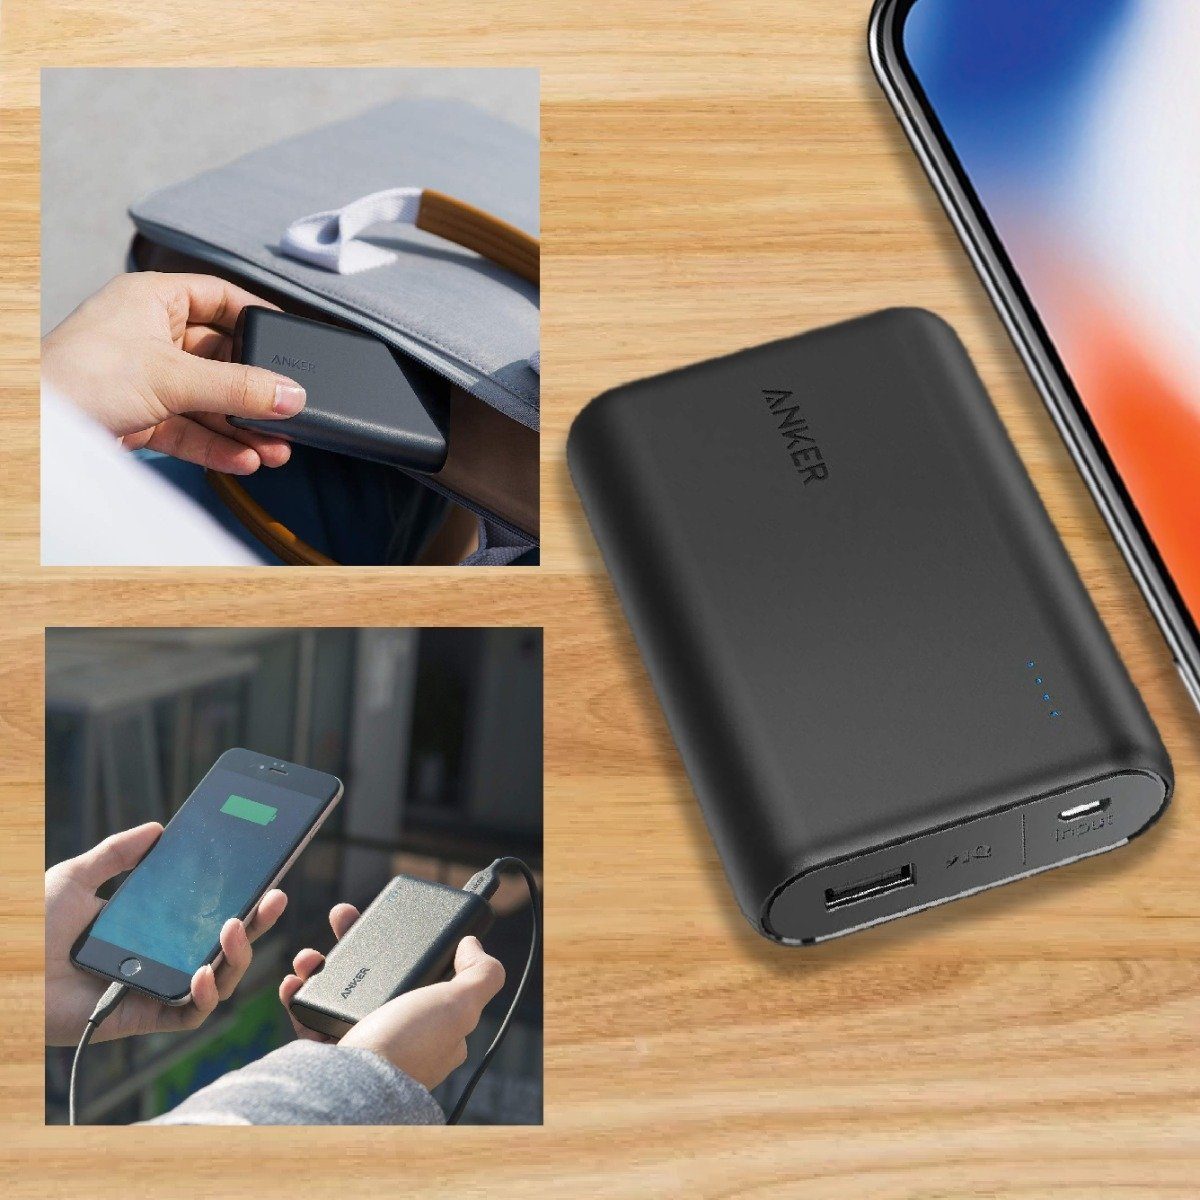 Anker PowerCore 10000mAh Portable Battery Charger